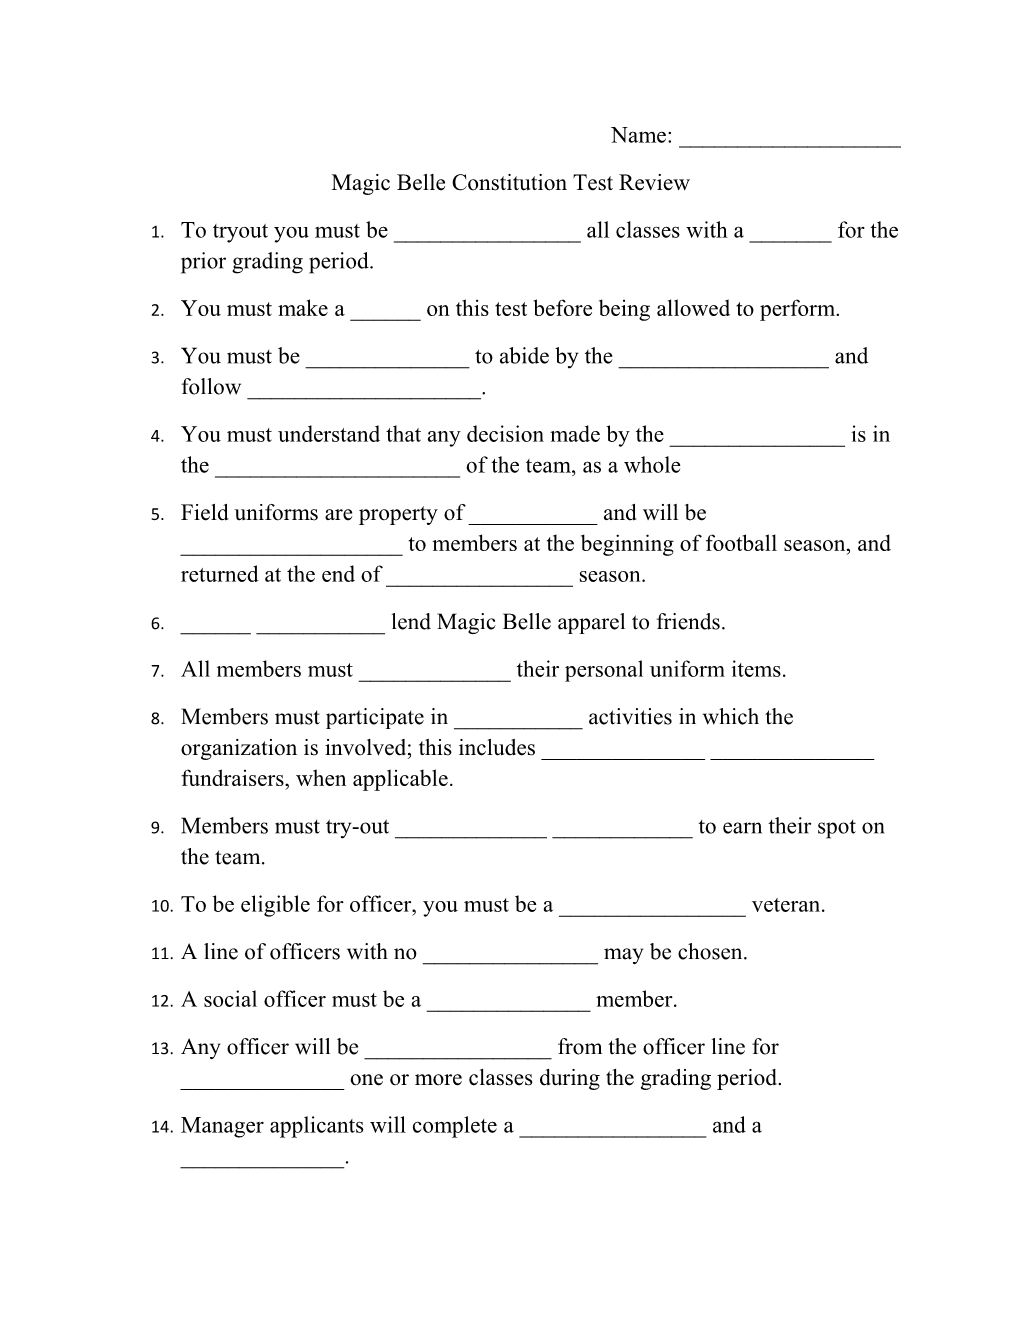 Magic Belle Constitution Test Review